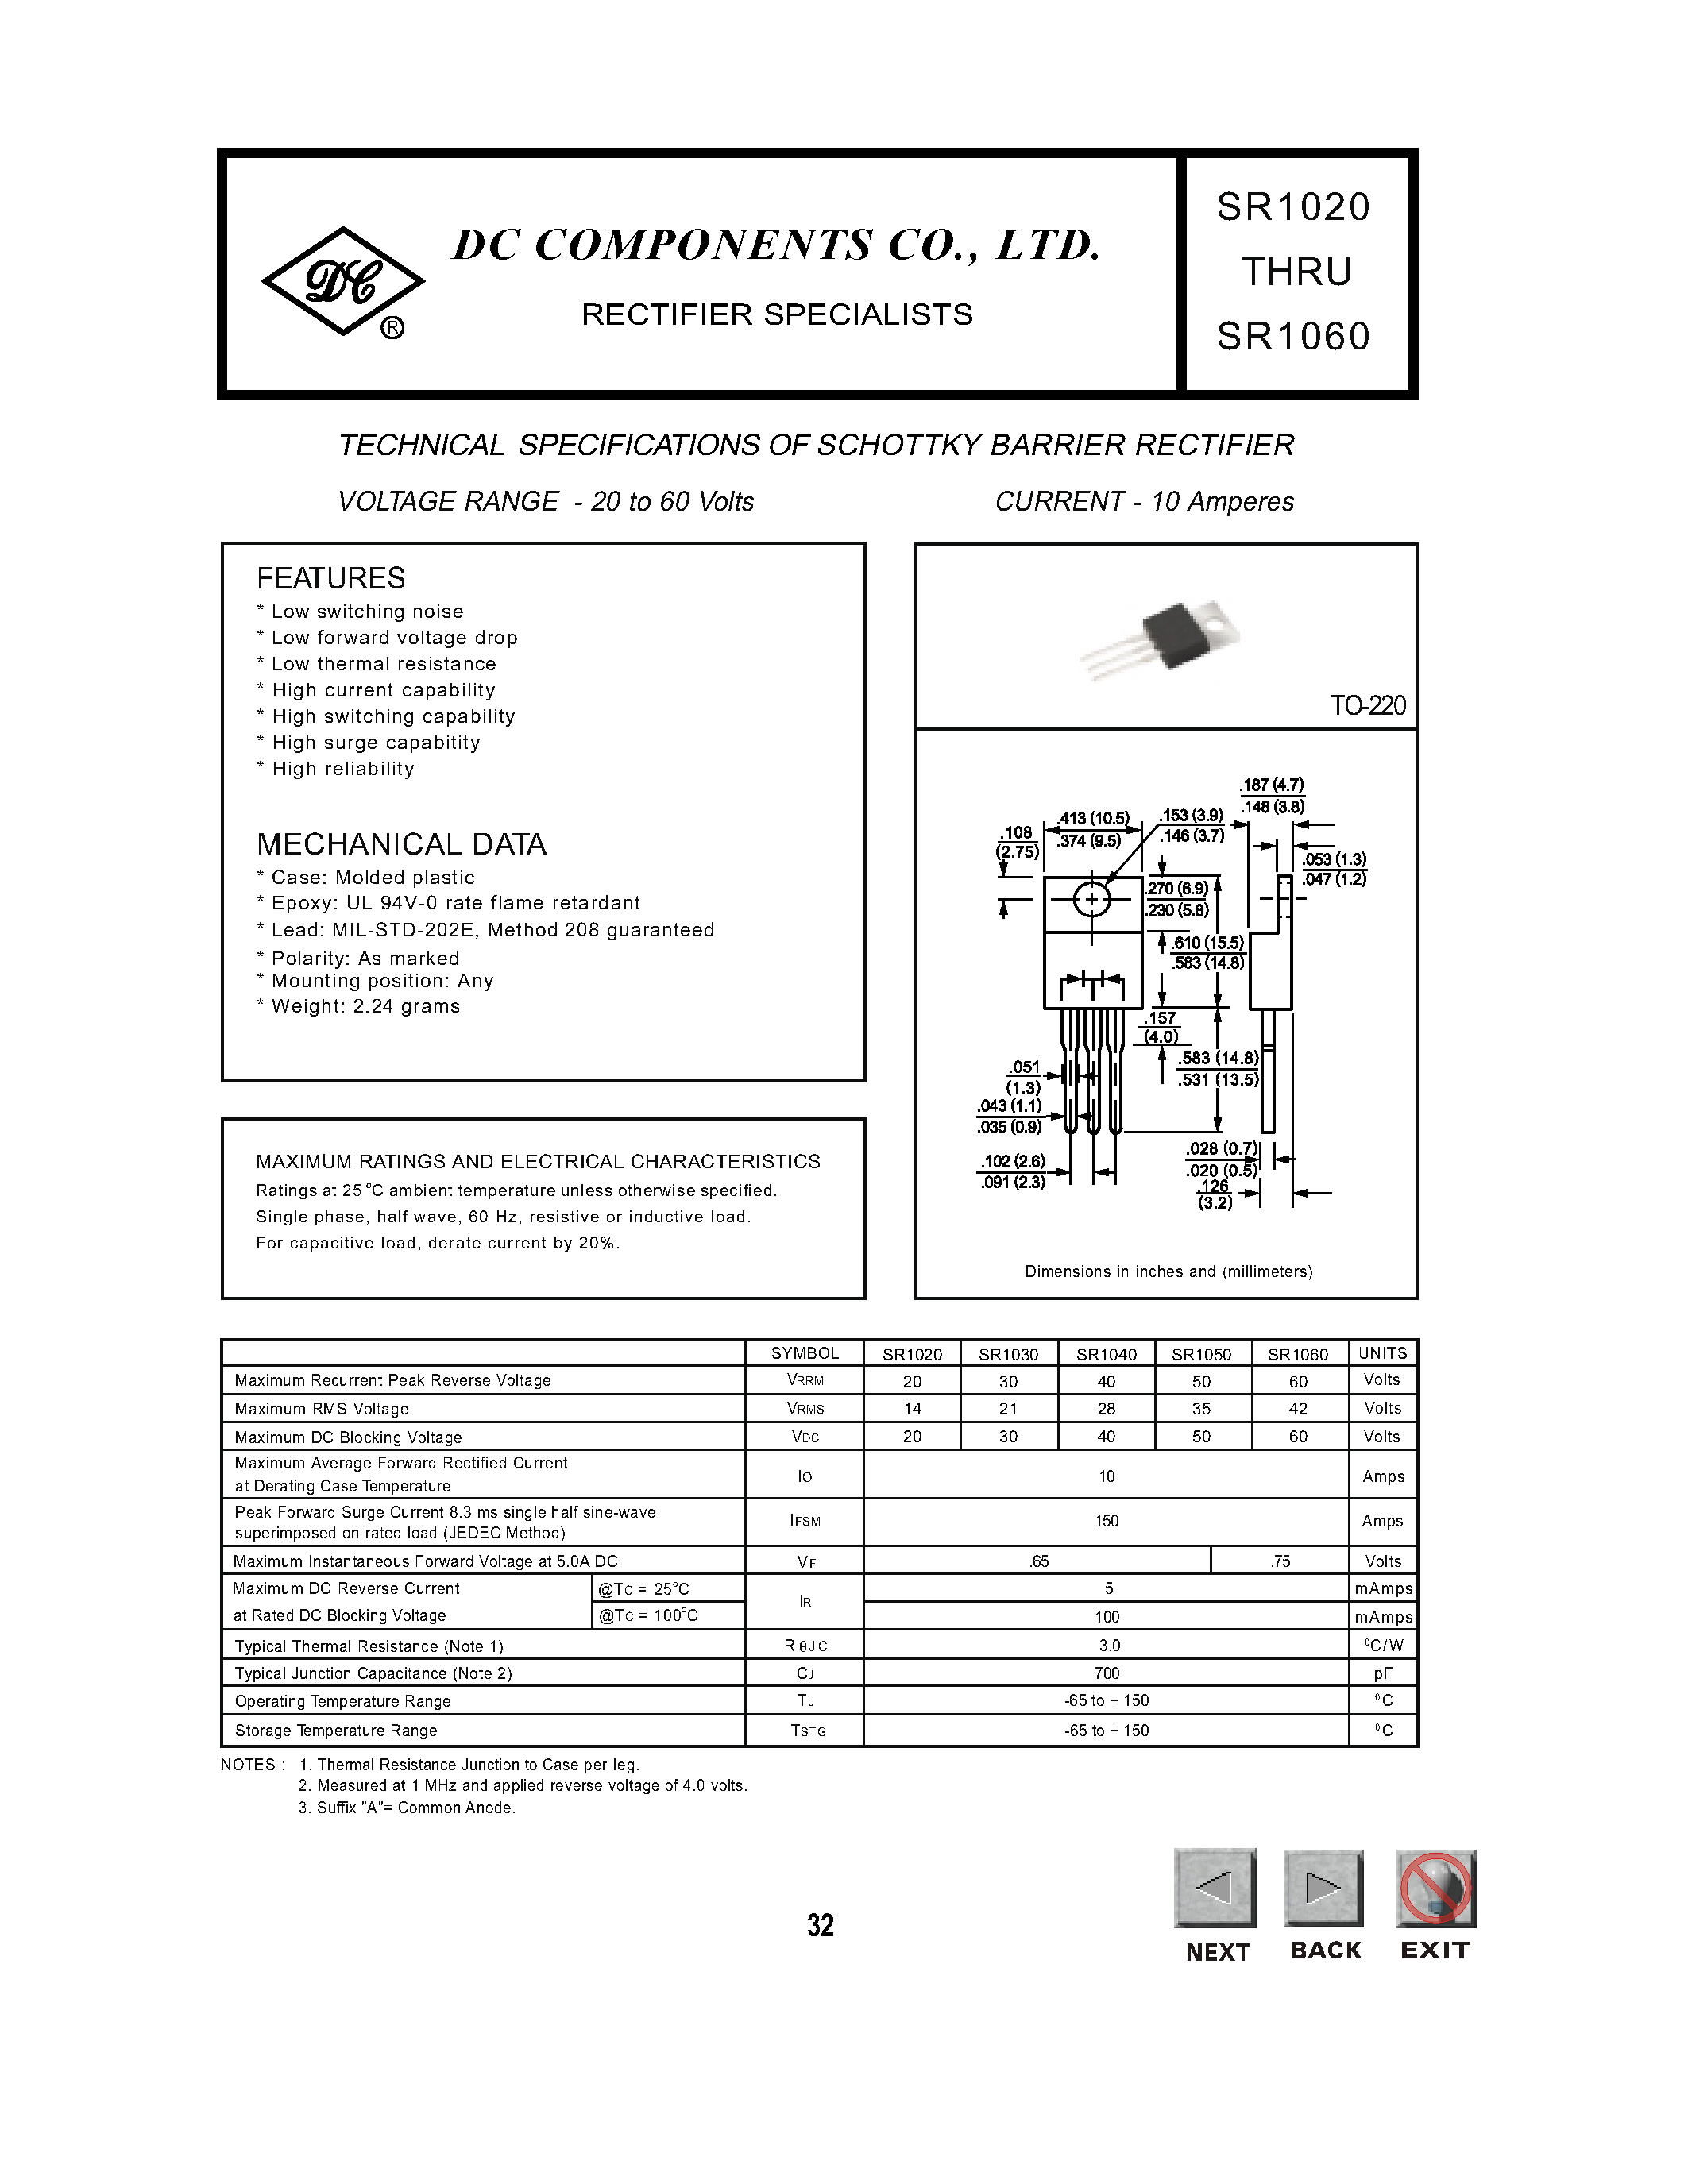 Datasheet SR1060 - TECHNICAL SPECIFICATIONS OF SCHOTTKY BARRIER RECTIFIER page 1